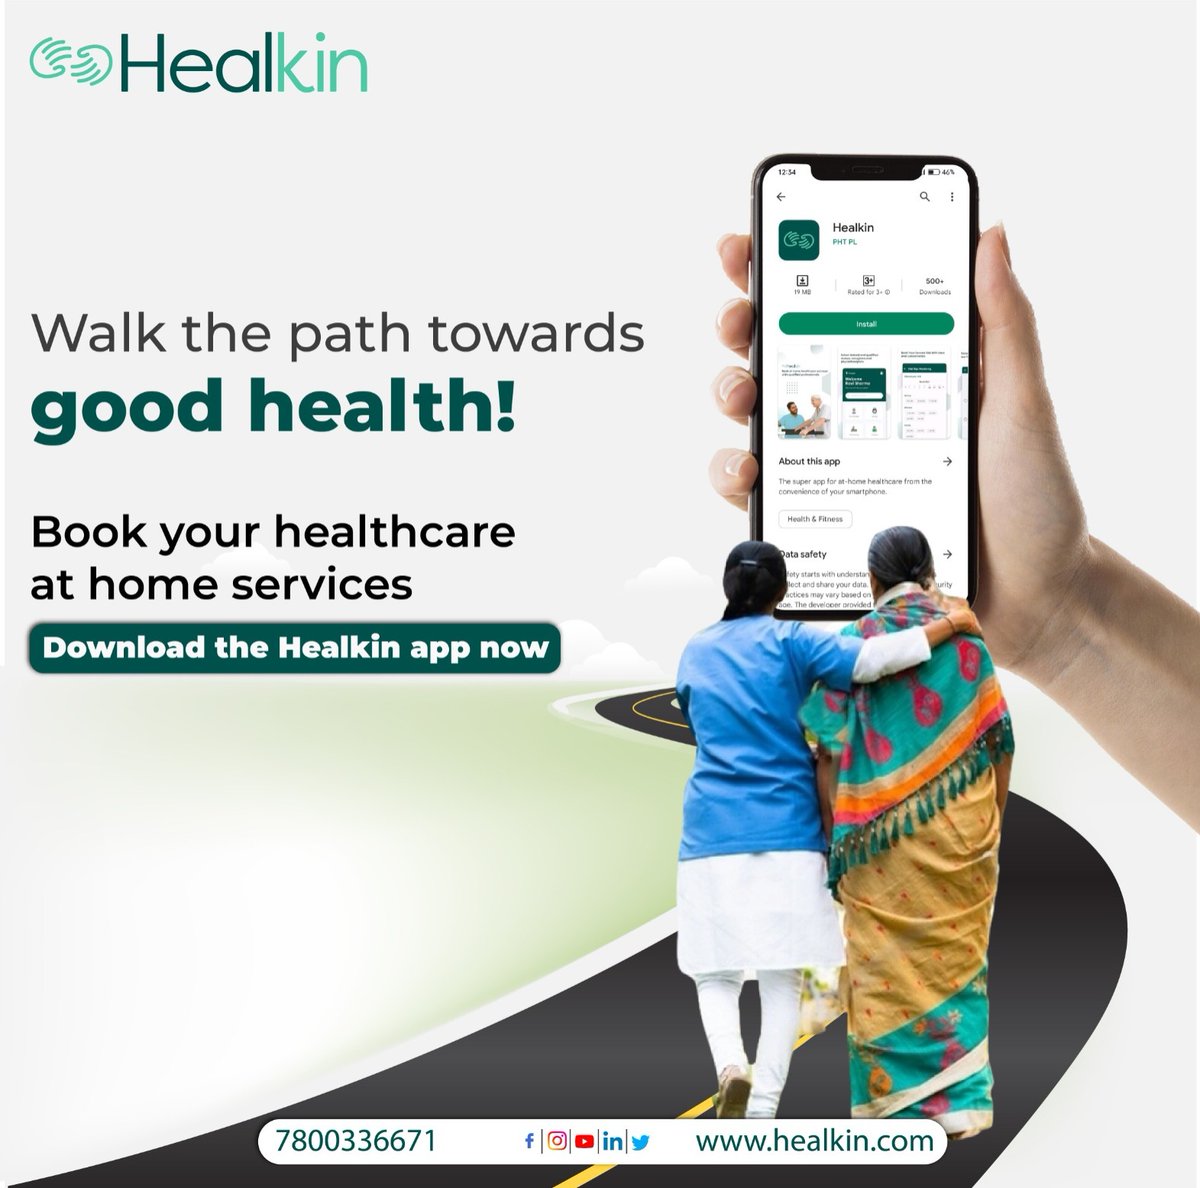 Healkin provides skilled nursing and caregiver support for people of all age groups. Our team is specifically trained to provide eldercare support. Download our new HEALKIN app to avail Healthcare at Home services today!

#homehealthcare #nursingcare #caregiver #healthapp